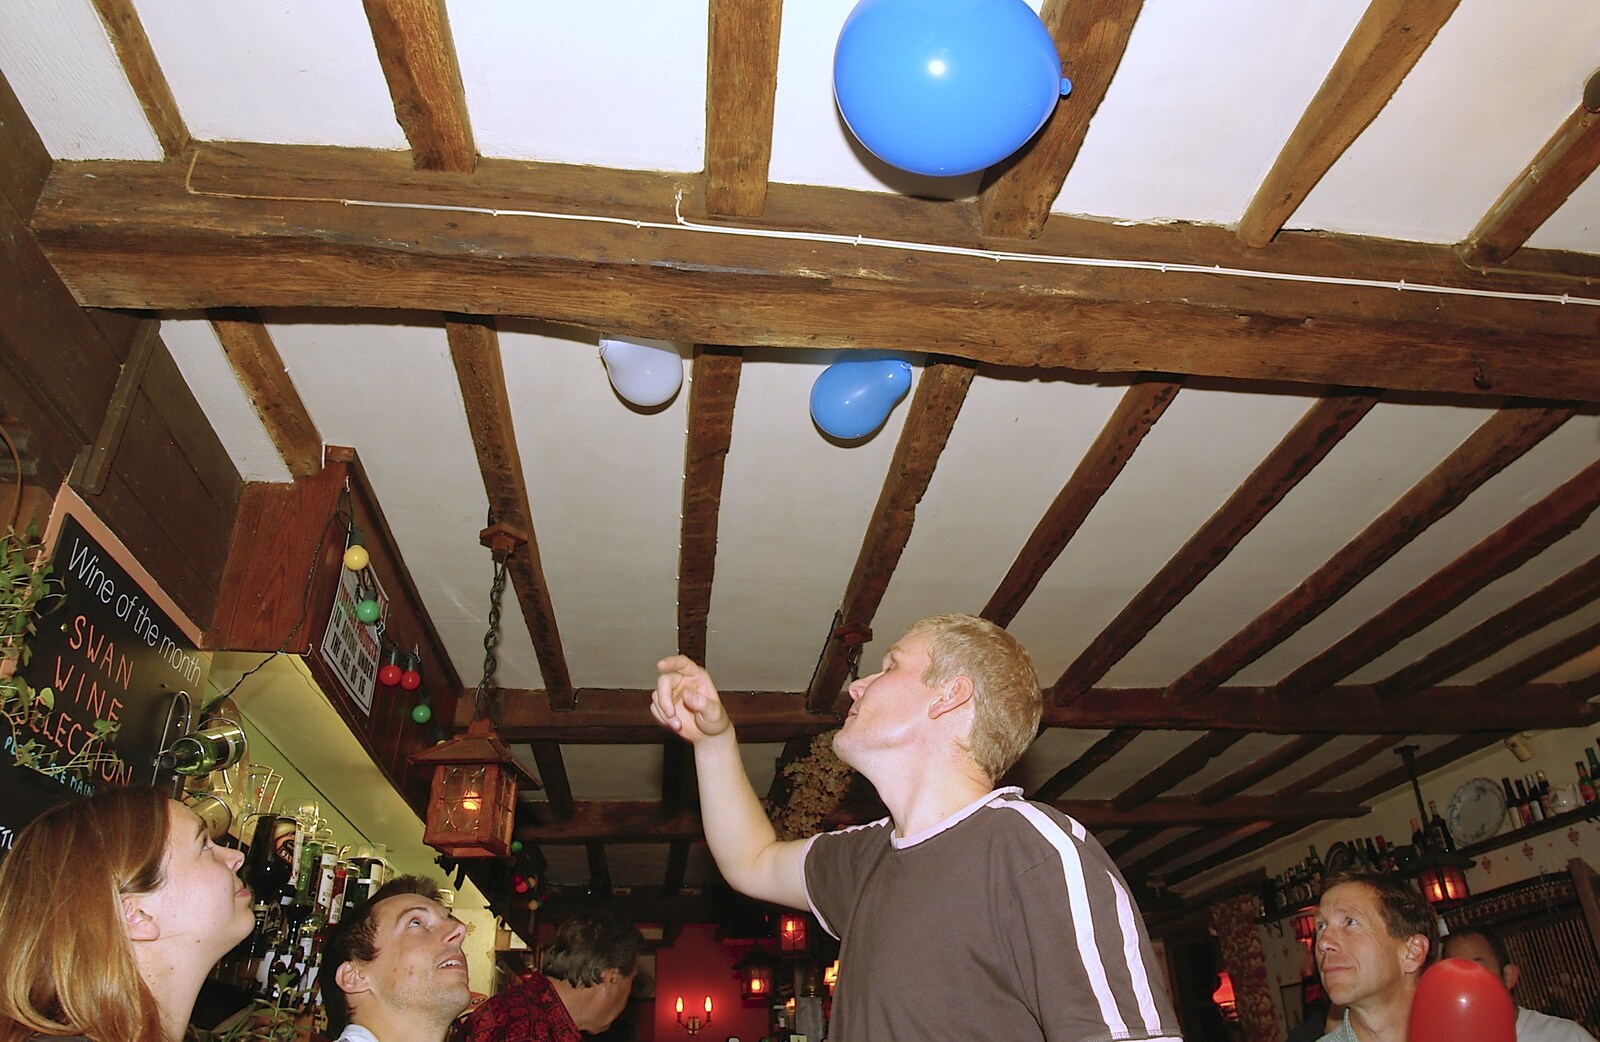 Bill sticks balloons to the ceiling with static from his head from Alan's Birthday at the Swan Inn, Brome, Suffolk - 18th August 2006